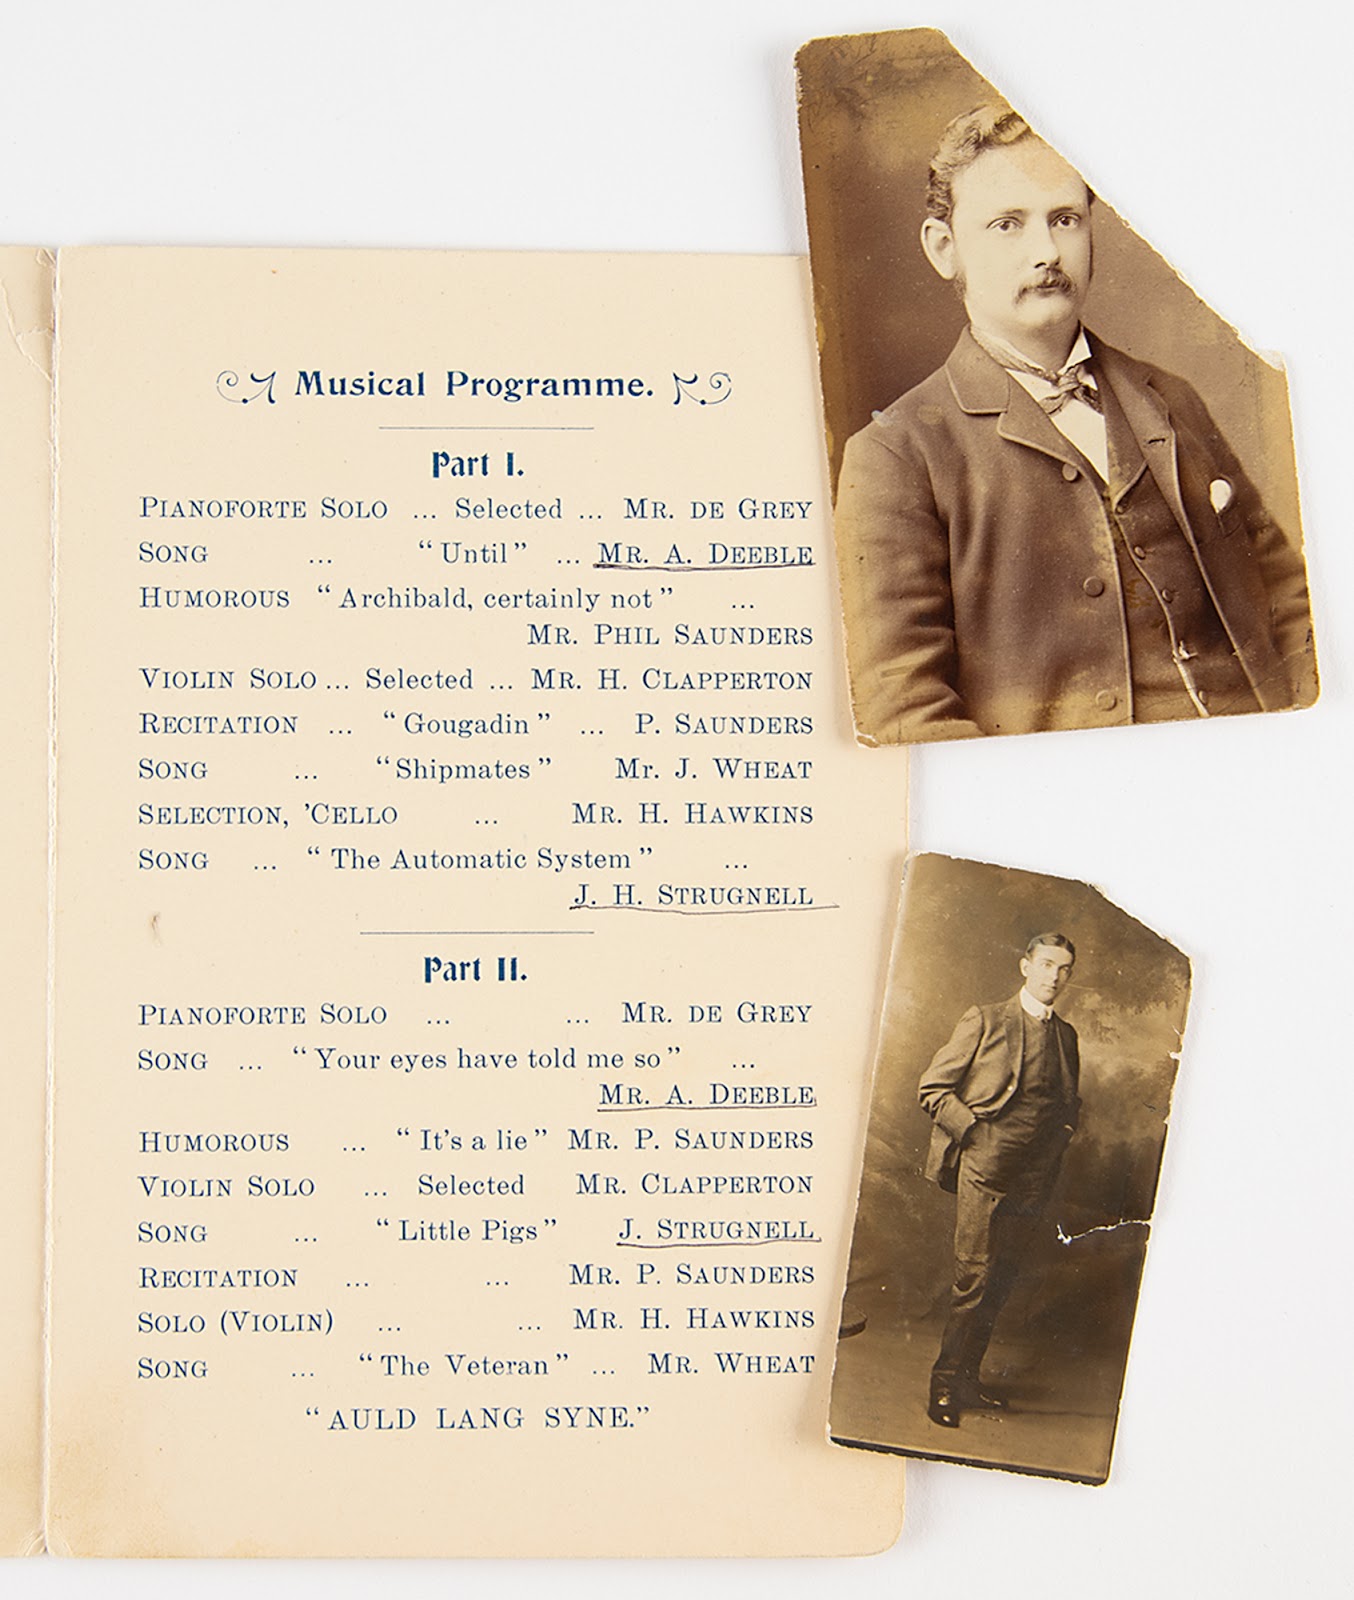 Program from the Adriatic Athletic and Social Club for April 28th, 1911. Listed as part of the musical programme are singers and soon-to-be Titanic passengers Alfred Arnold Deeble and John Herbert Strugnell. Beside the program are two early 20th-century portraits of Deeble (top) and Strugnell (bottom).